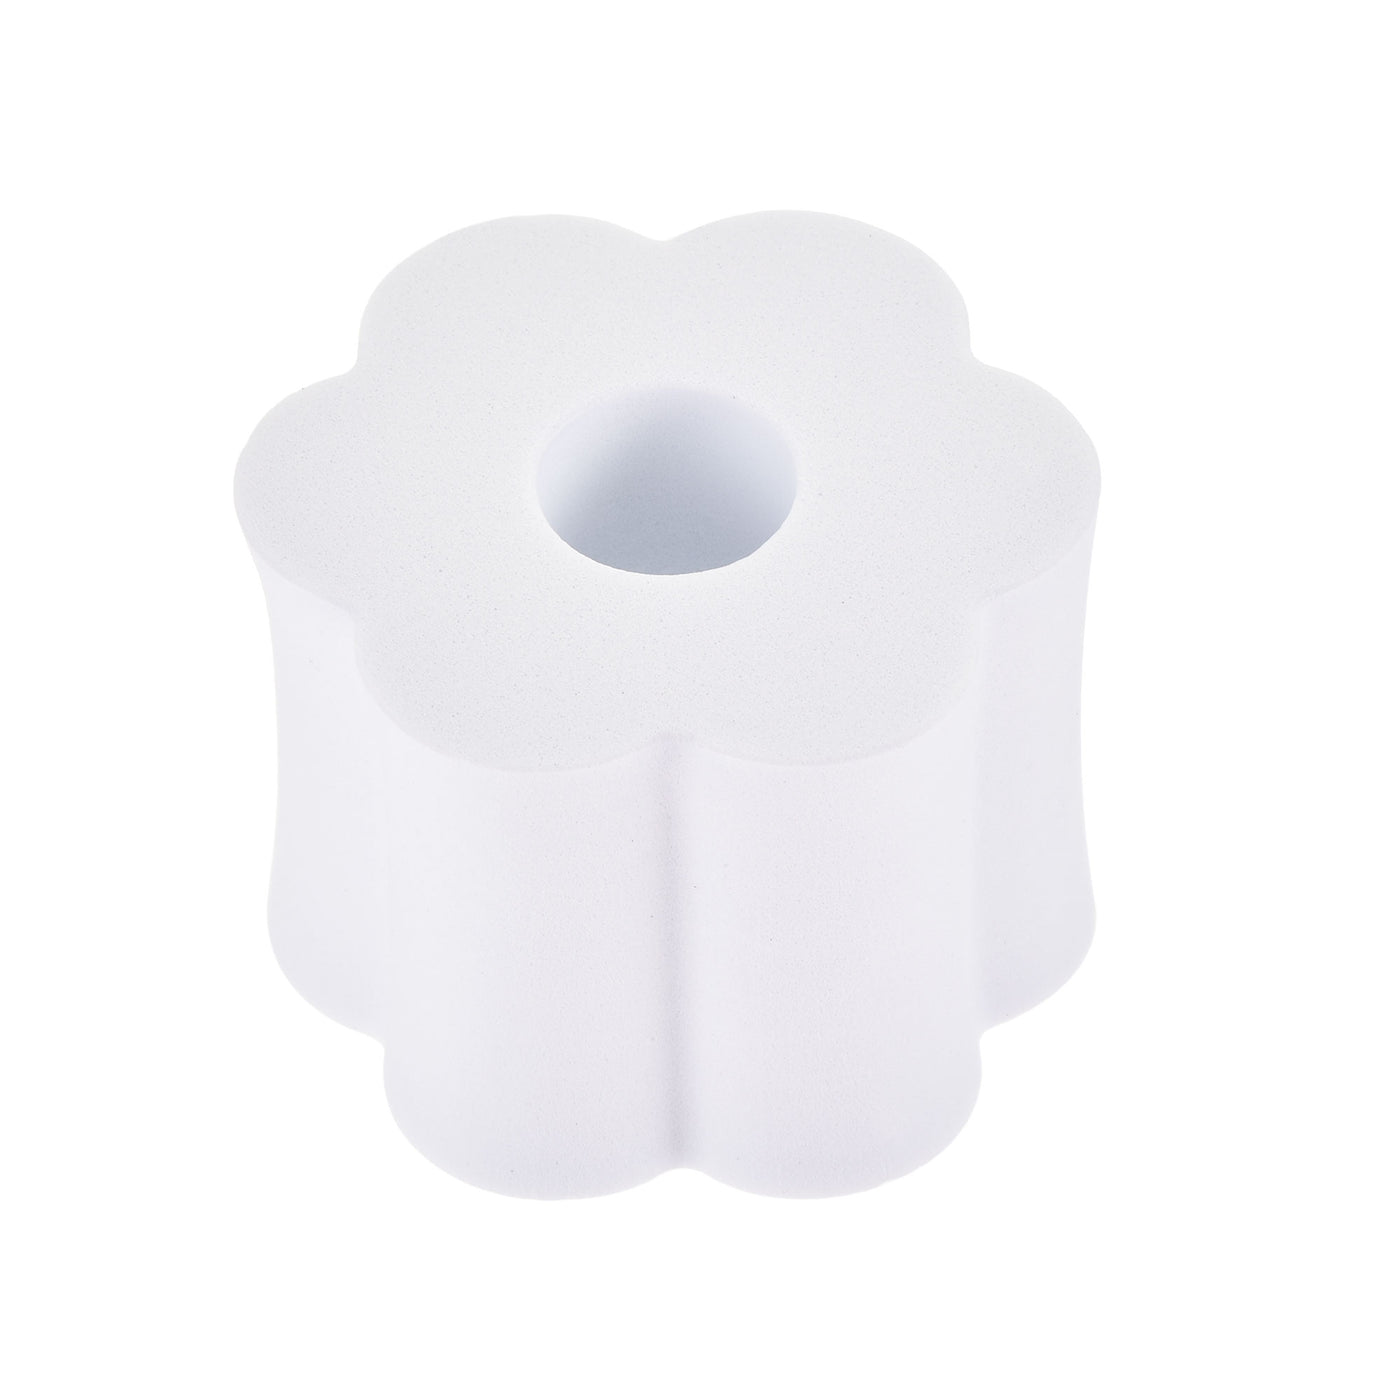 Uxcell Uxcell Cup Turner Foam 2.44 Inch Diameter Foam Inserts White for 3/4 Inch PVC Pipe 6Pcs